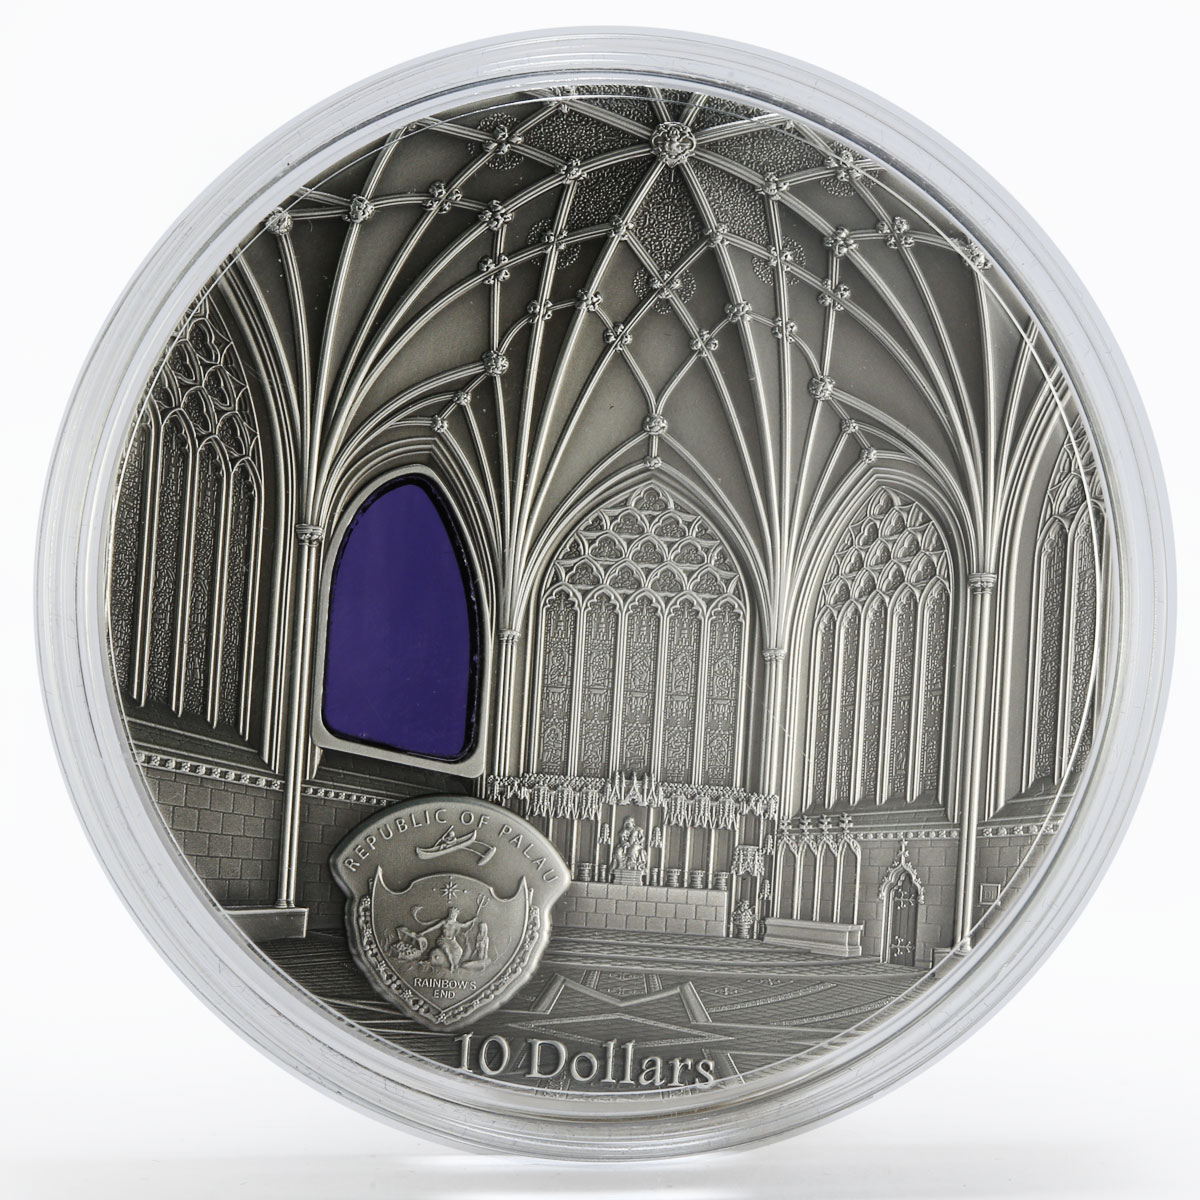 Palau 10 dollars Tiffany Art Wells Cathedral Decorated silver coin 2017